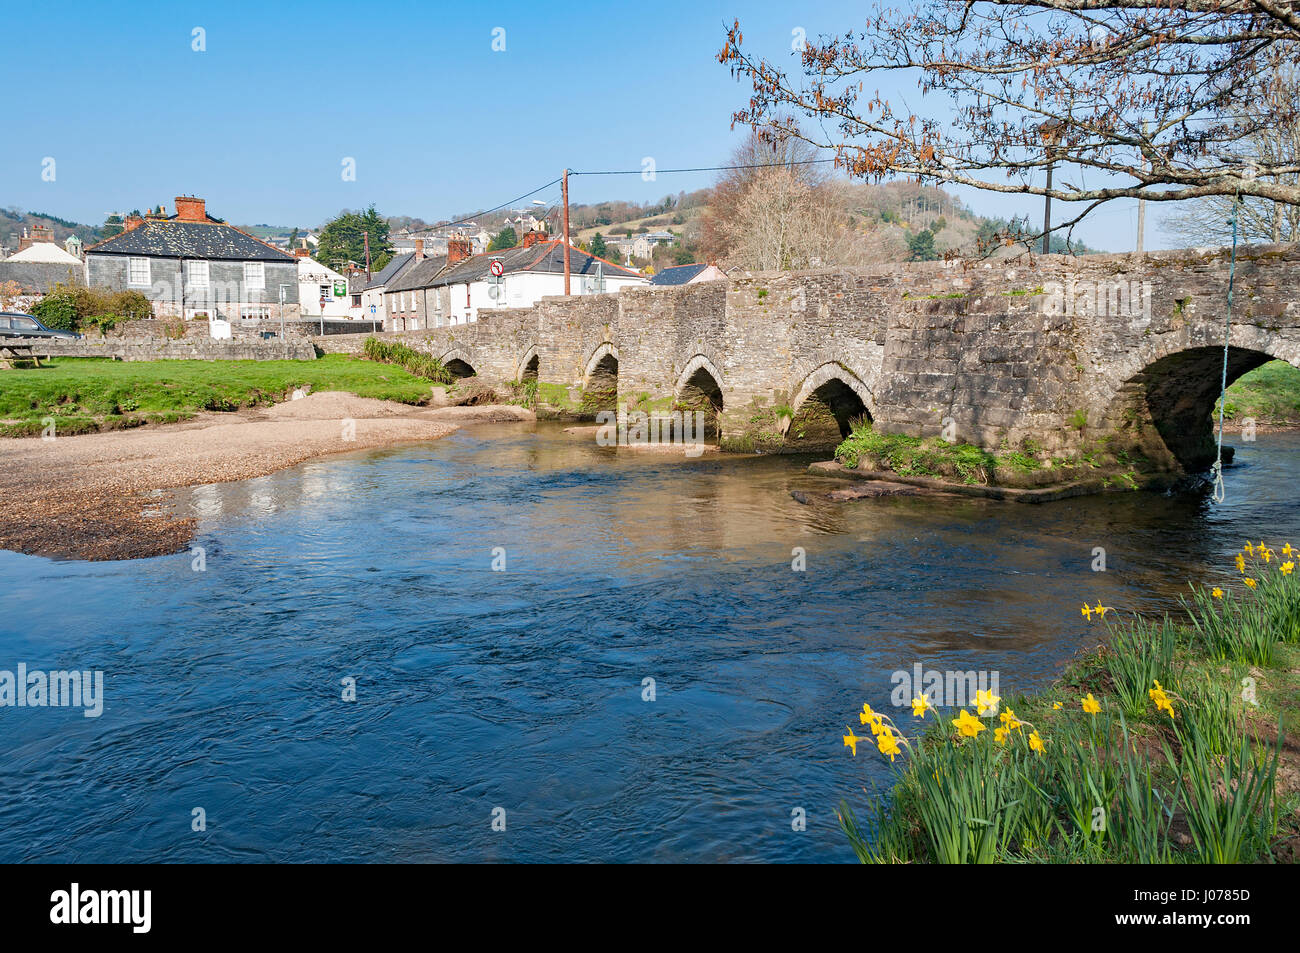 The historic town of Lostwithiel in Cornwall, England, UK. Stock Photo